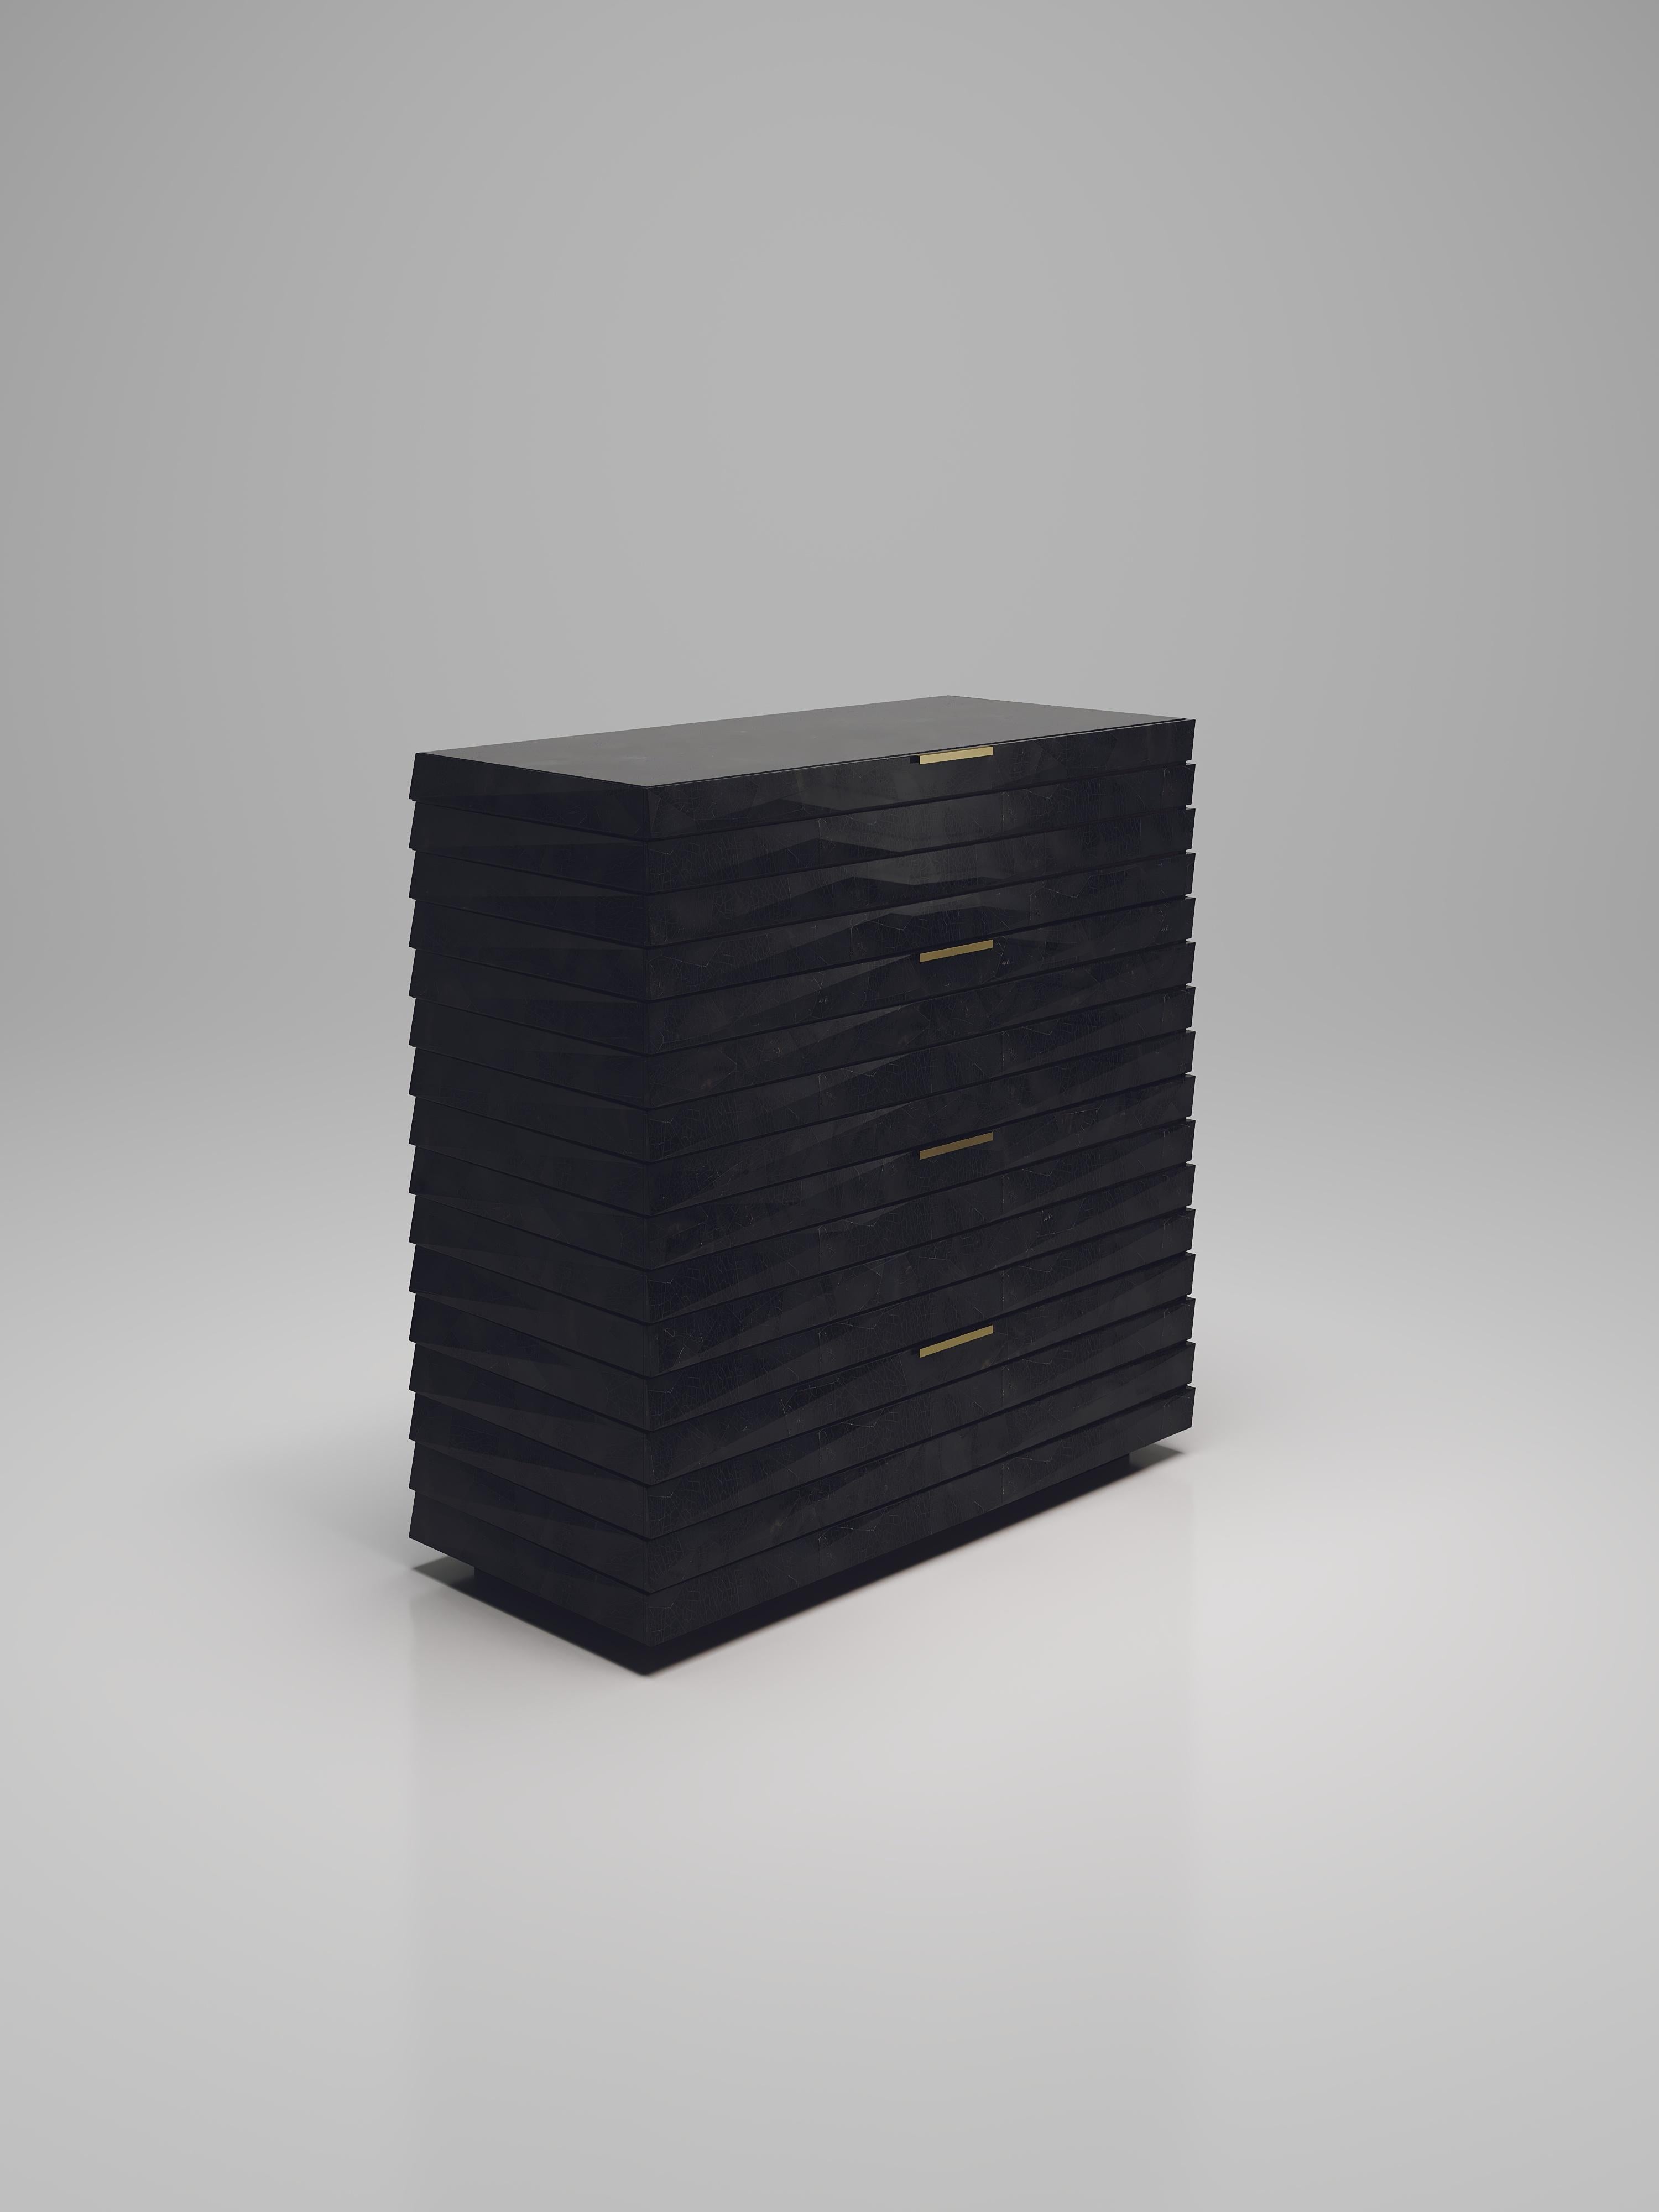 The fluted chest of drawers by R & Y Augousti is a sleek and geometric design. The black pen shell inlaid piece provides great utility while retaining a striking aesthetic with the incredible hand craved fluted details. This piece includes a total